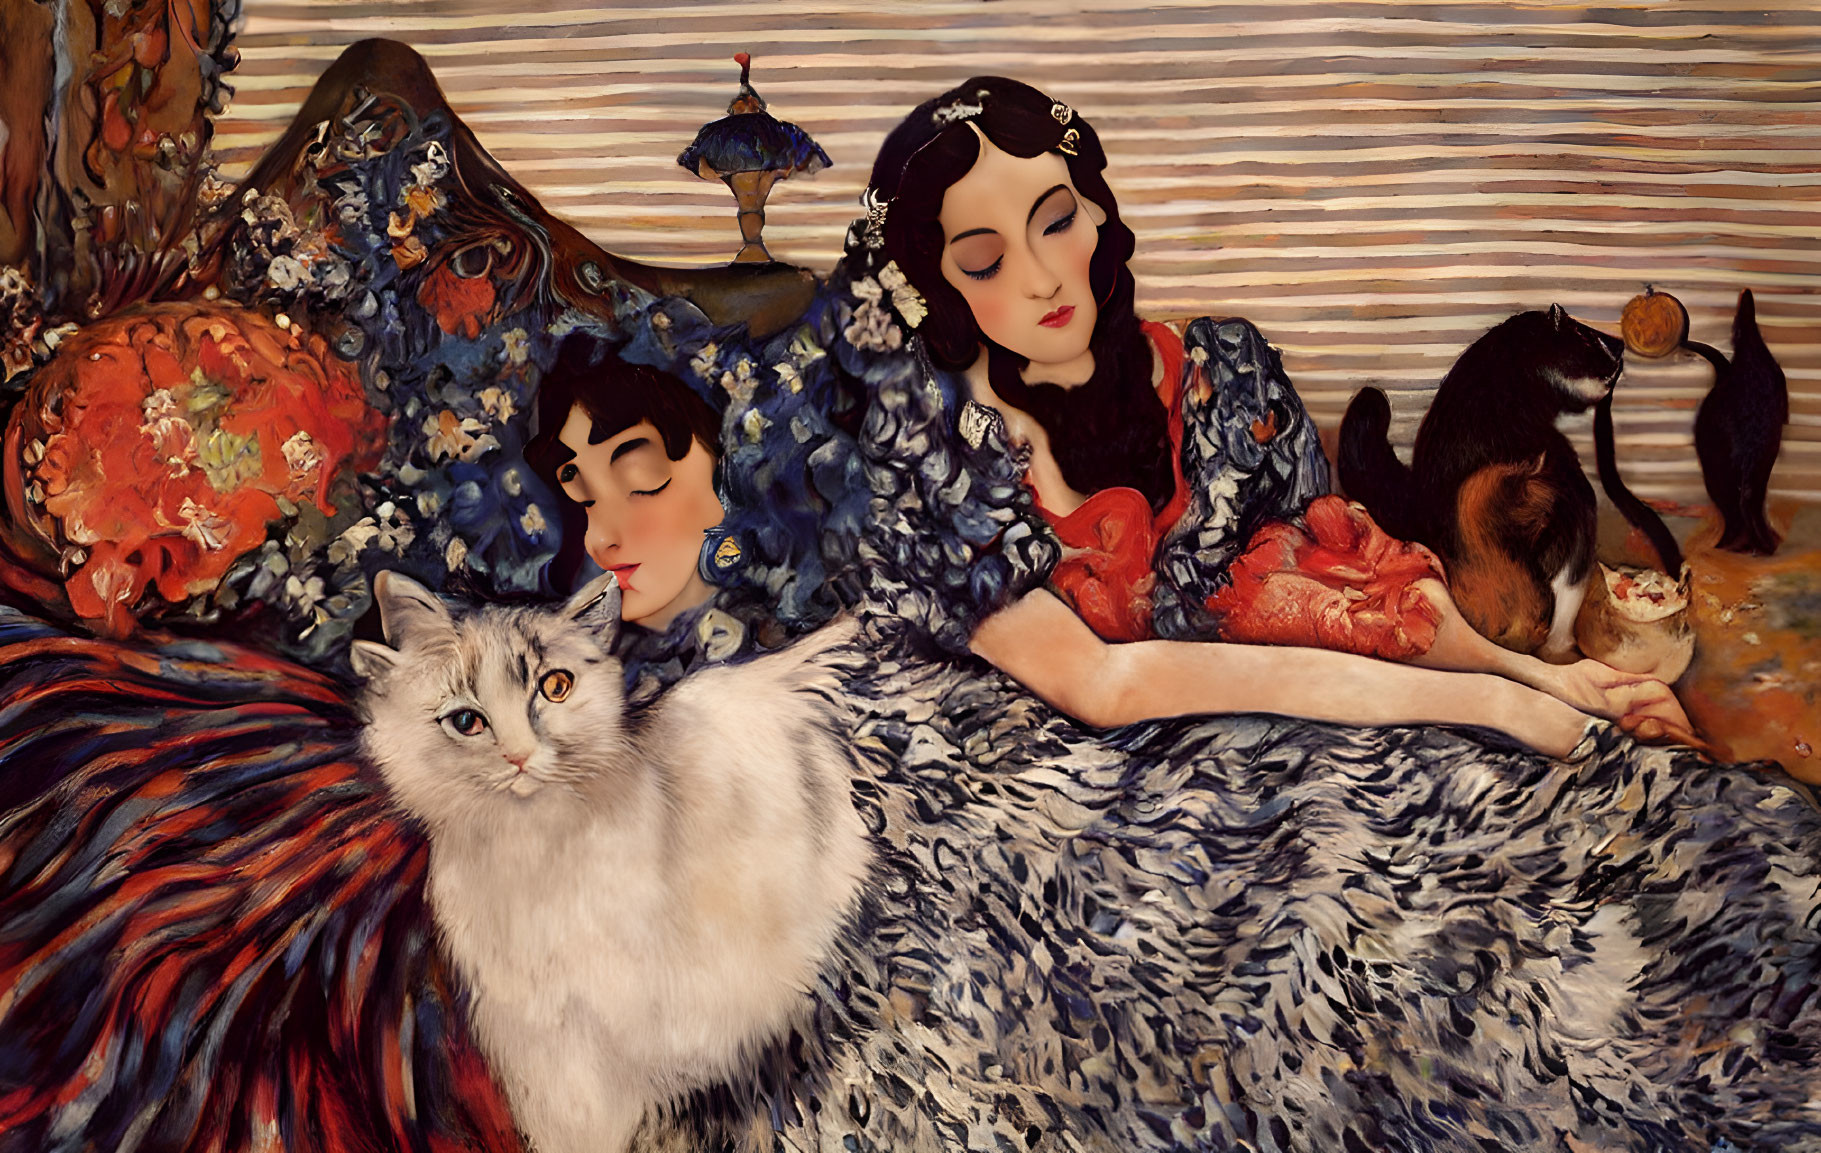 Stylized women on patterned couch with cat and lamp in serene setting